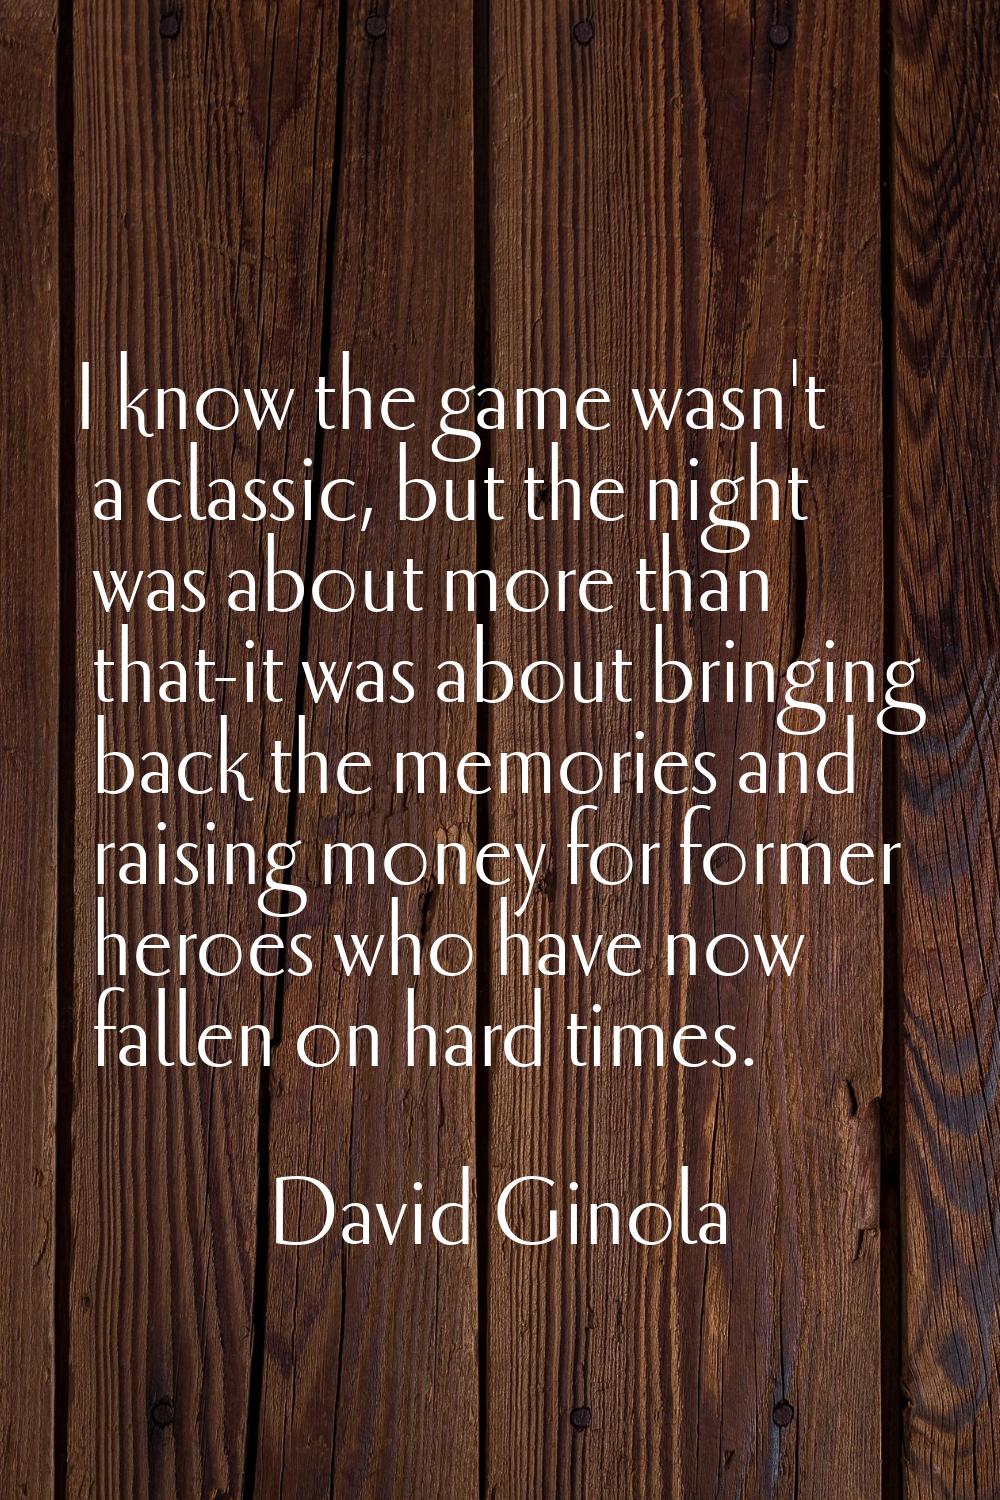 I know the game wasn't a classic, but the night was about more than that-it was about bringing back